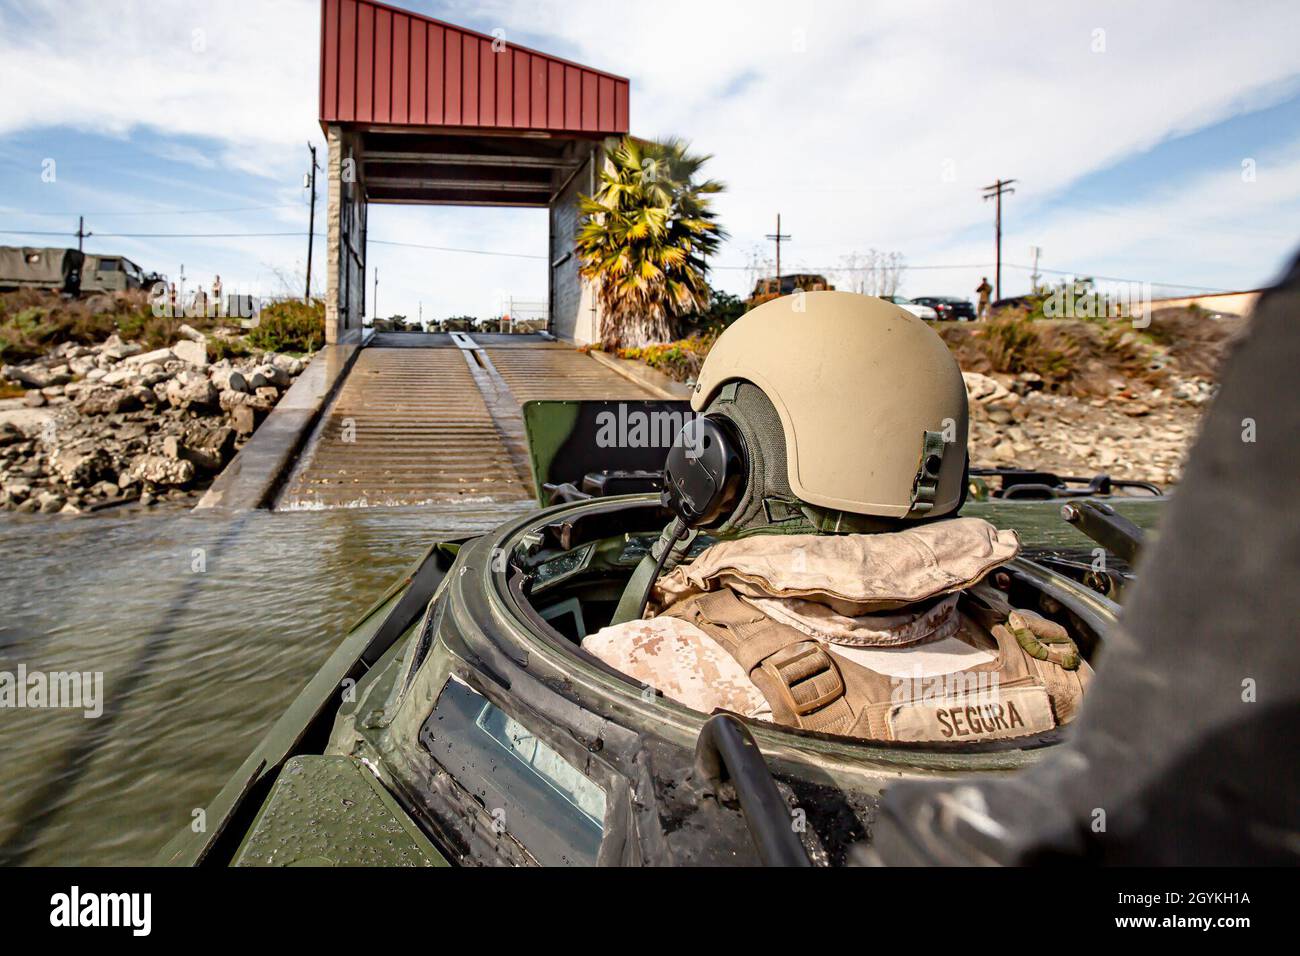 U.S. Marine Corps Sgt. Salomon Segura, an assault amphibious vehicle section leader with 3rd Assault Amphibian Battalion, drives an AAV-P7/A1 assault amphibious vehicle out of the water during Exercise Iron Fist 2020 on Marine Corps Base Camp Pendleton, California, Jan. 19. Exercise Iron Fist provides realistic, relevant training necessary for effective combined military operations. (U.S. Marine Corps photo by Lance Cpl. Britany Rowlett) Stock Photo